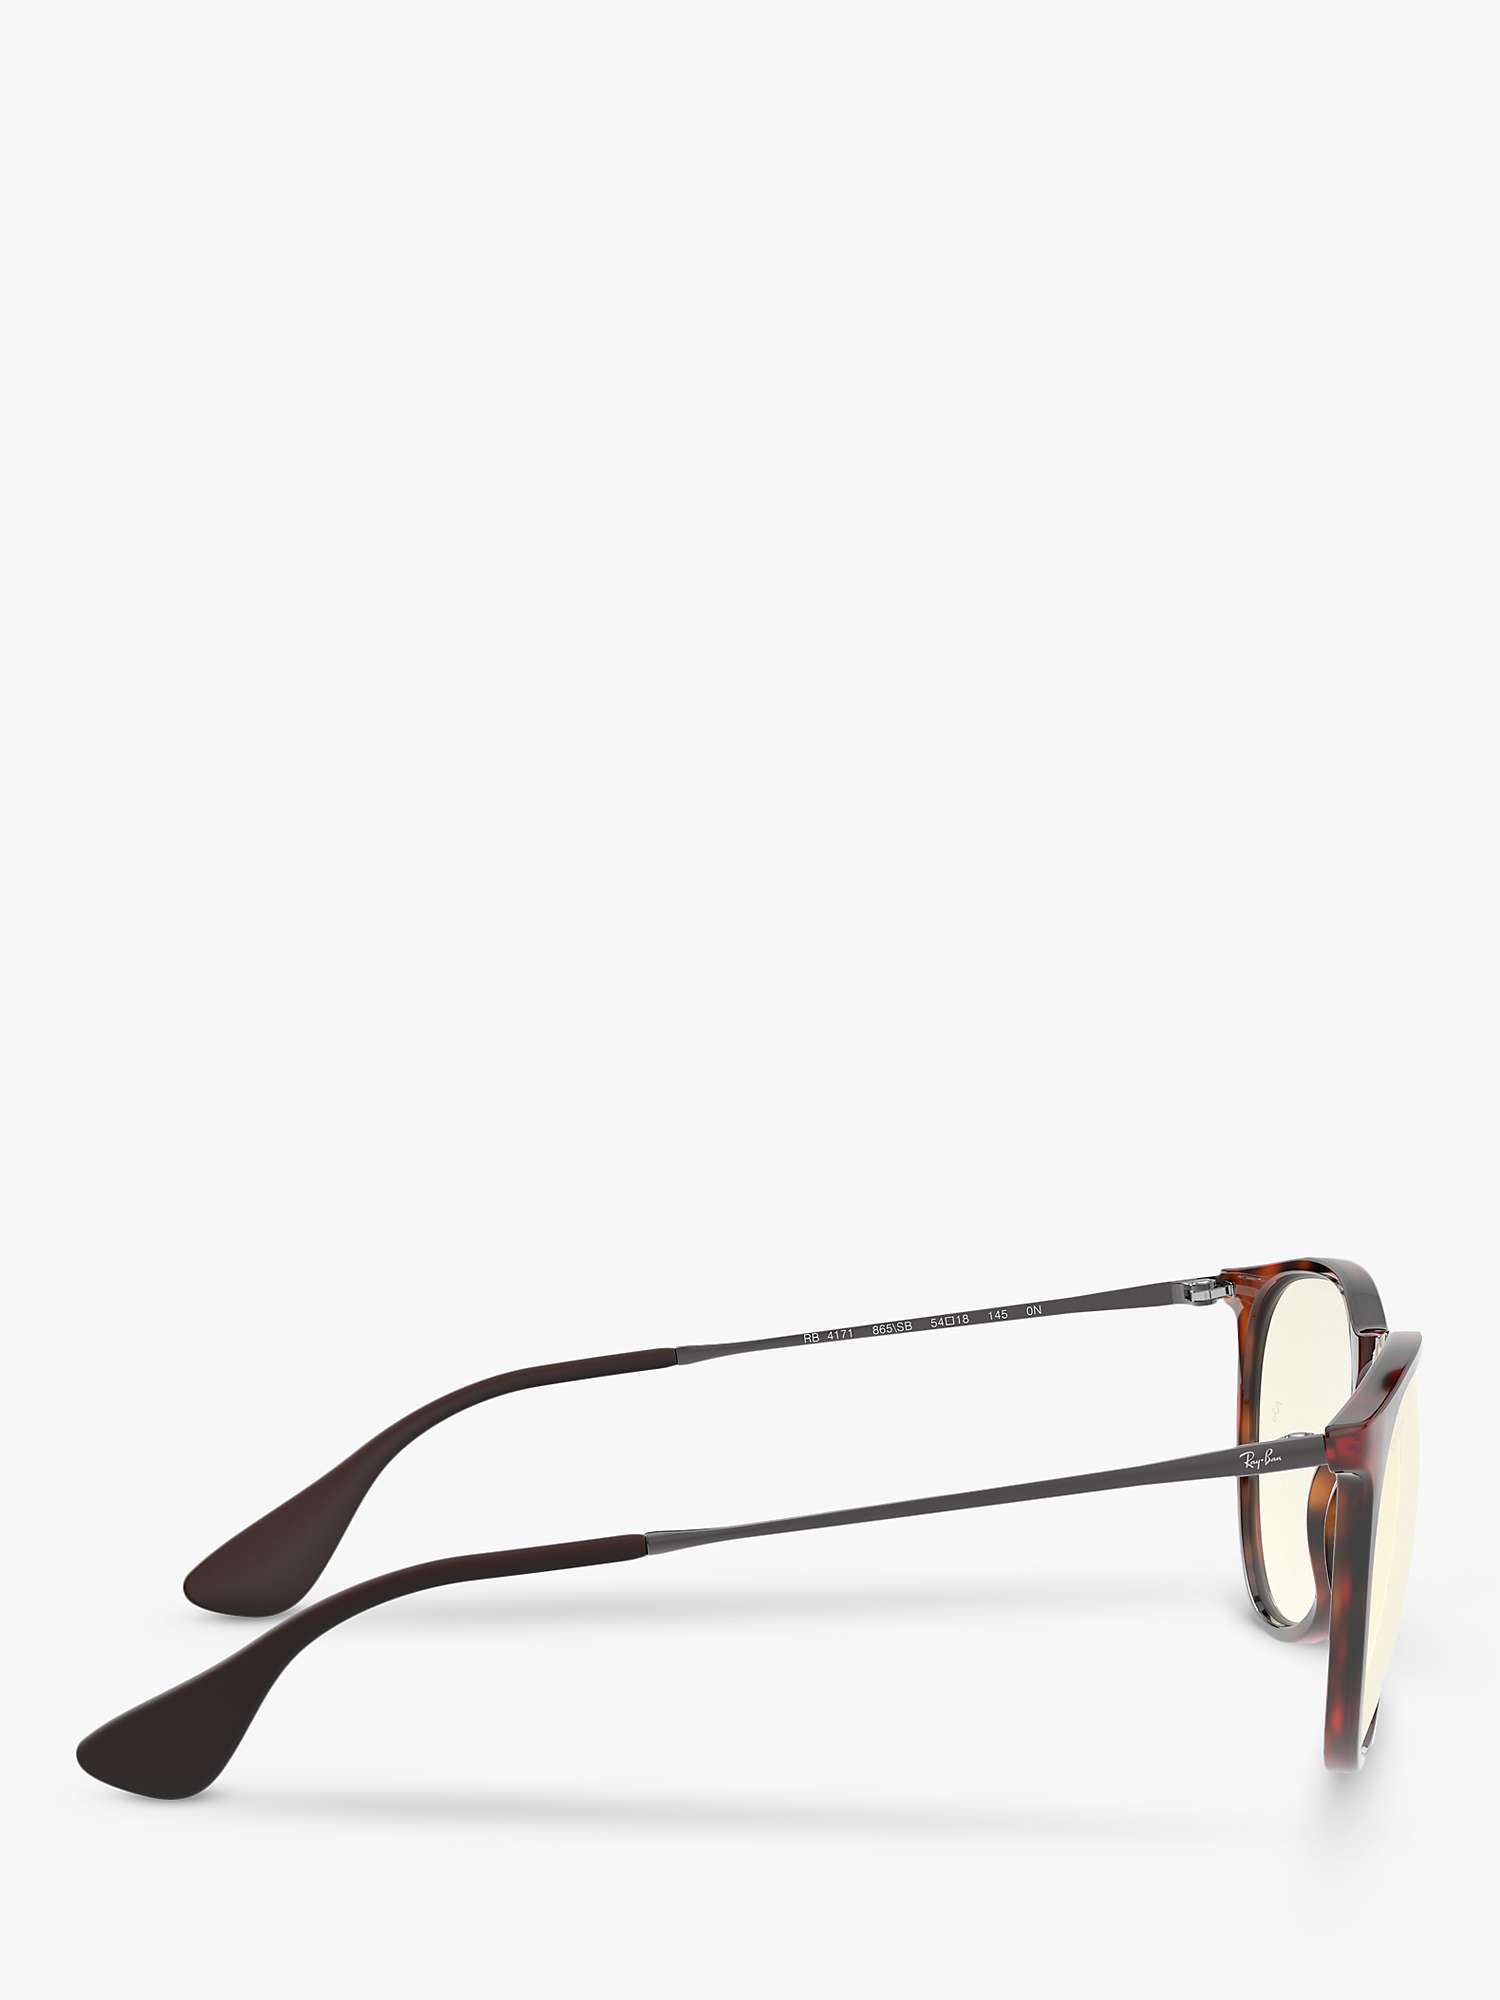 Buy Ray-Ban RB4171 Women's Square Tortoise Shell Sunglasses, Mid Brown Online at johnlewis.com